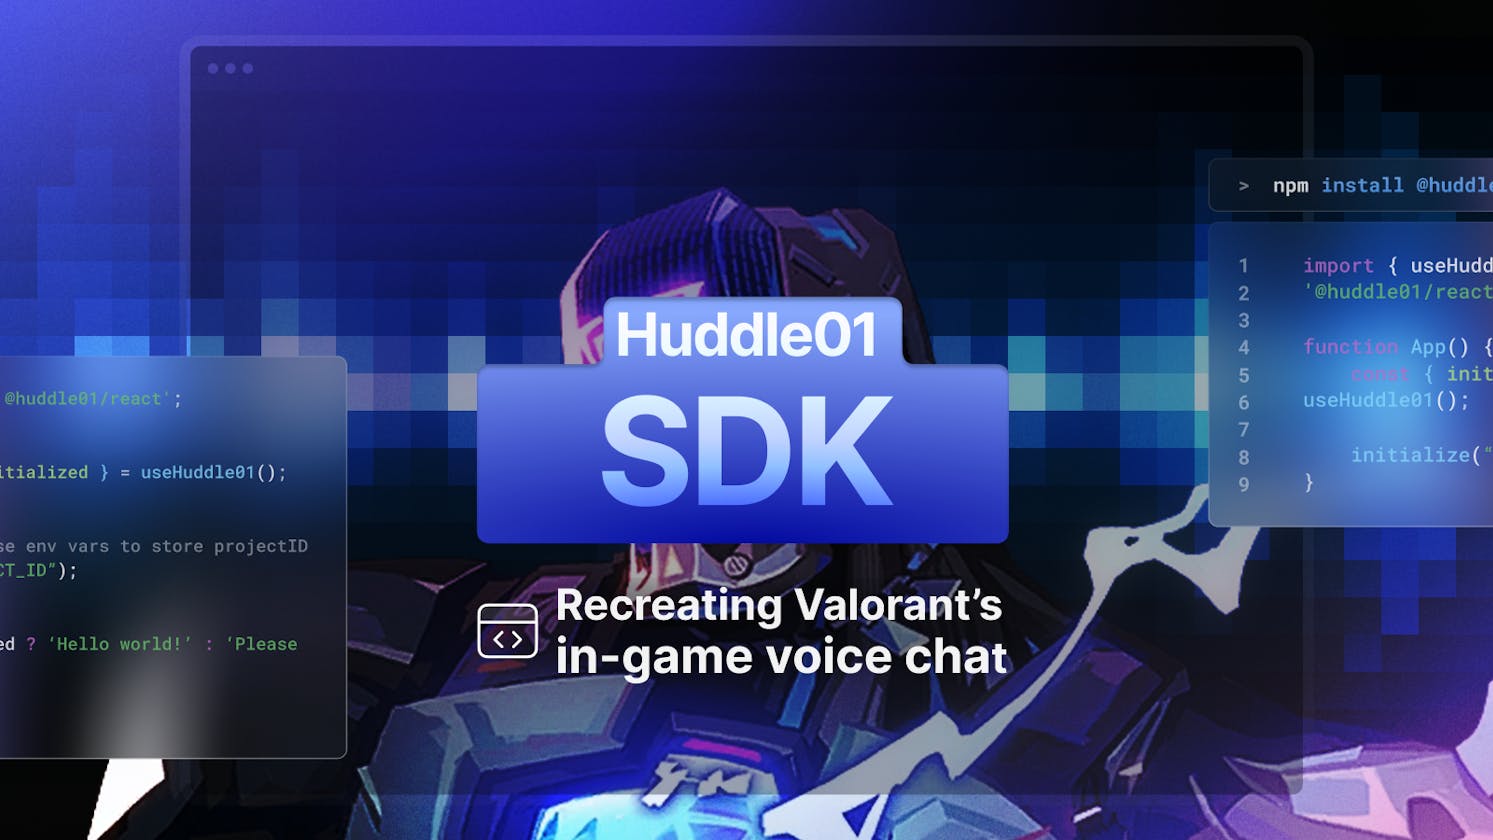 Recreating Valorant’s in-game voice chat system using Huddle01 SDK ⚔️ 🎙